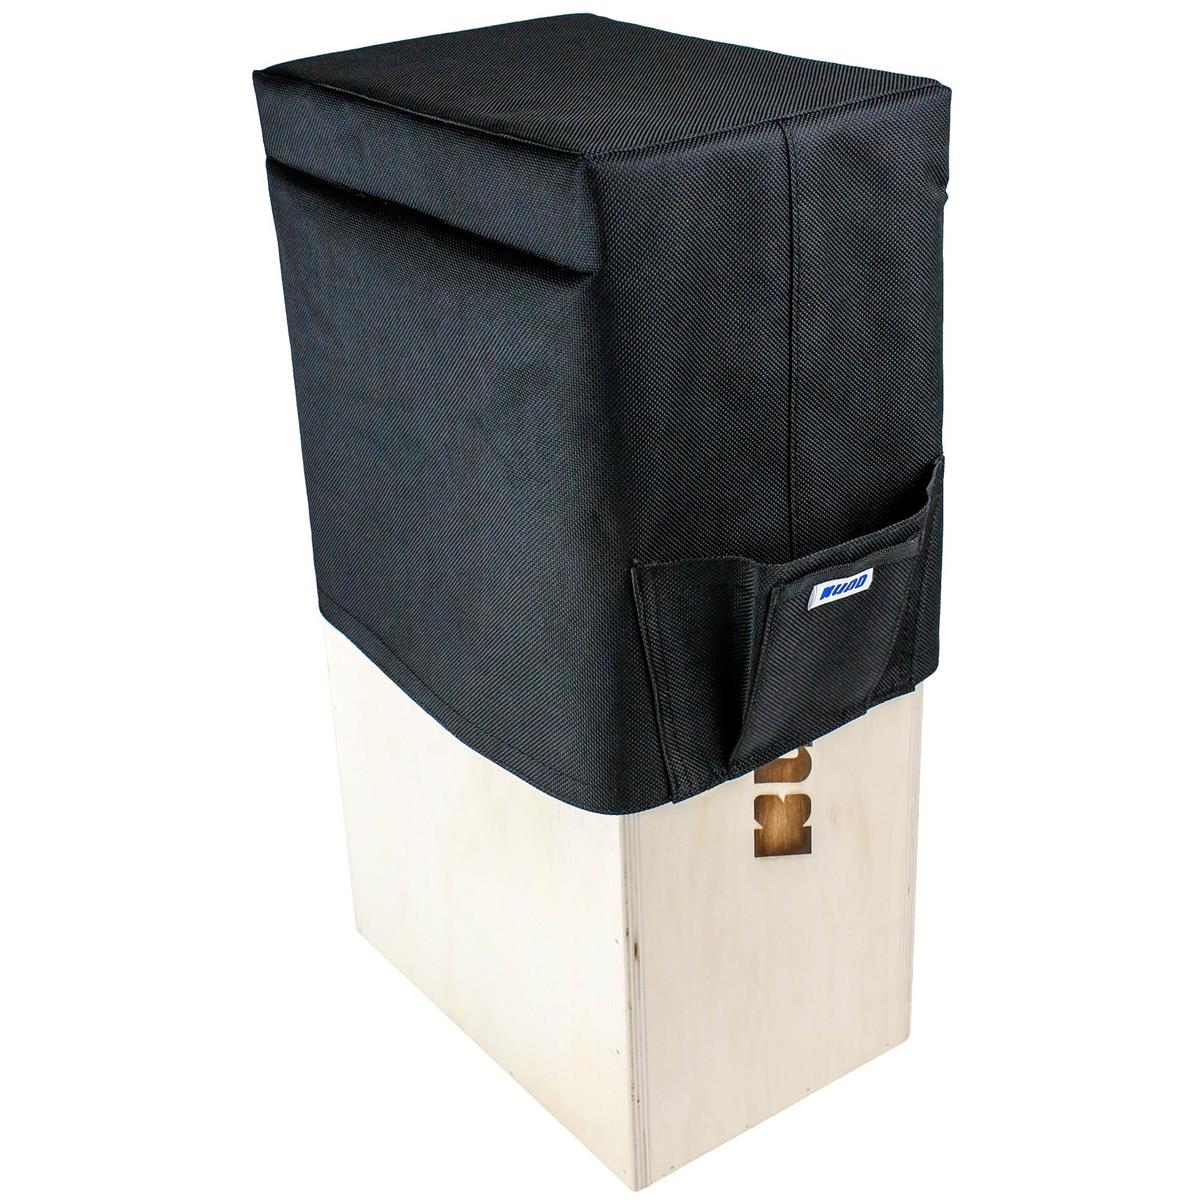 Photos - Other for studios Kupo Apple Box Seat Cushion, Vertical KG090611 